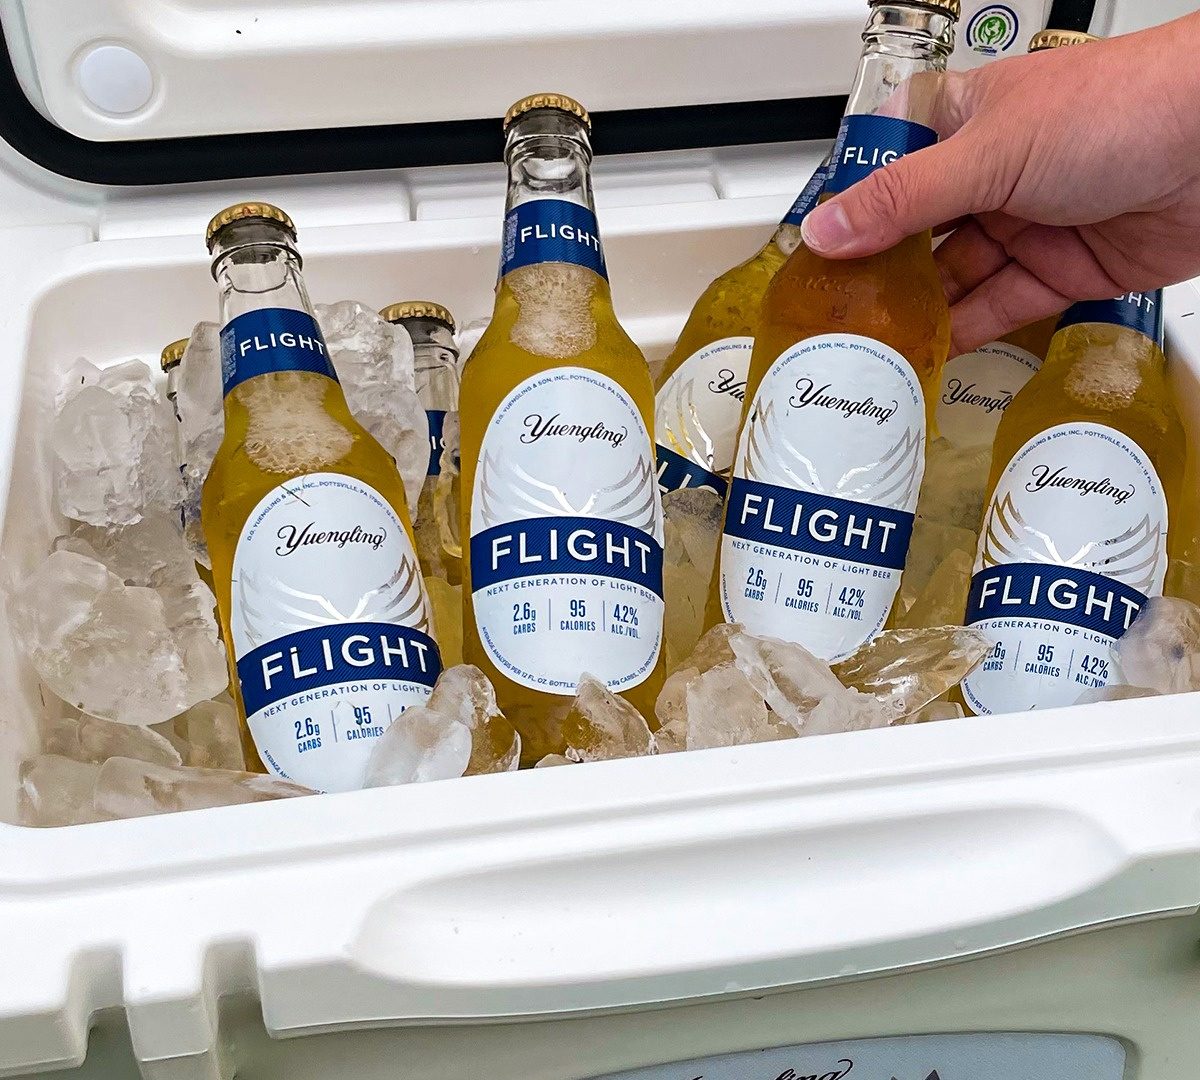 Yeungling Flight Beer is a low carb beer for keto dieters